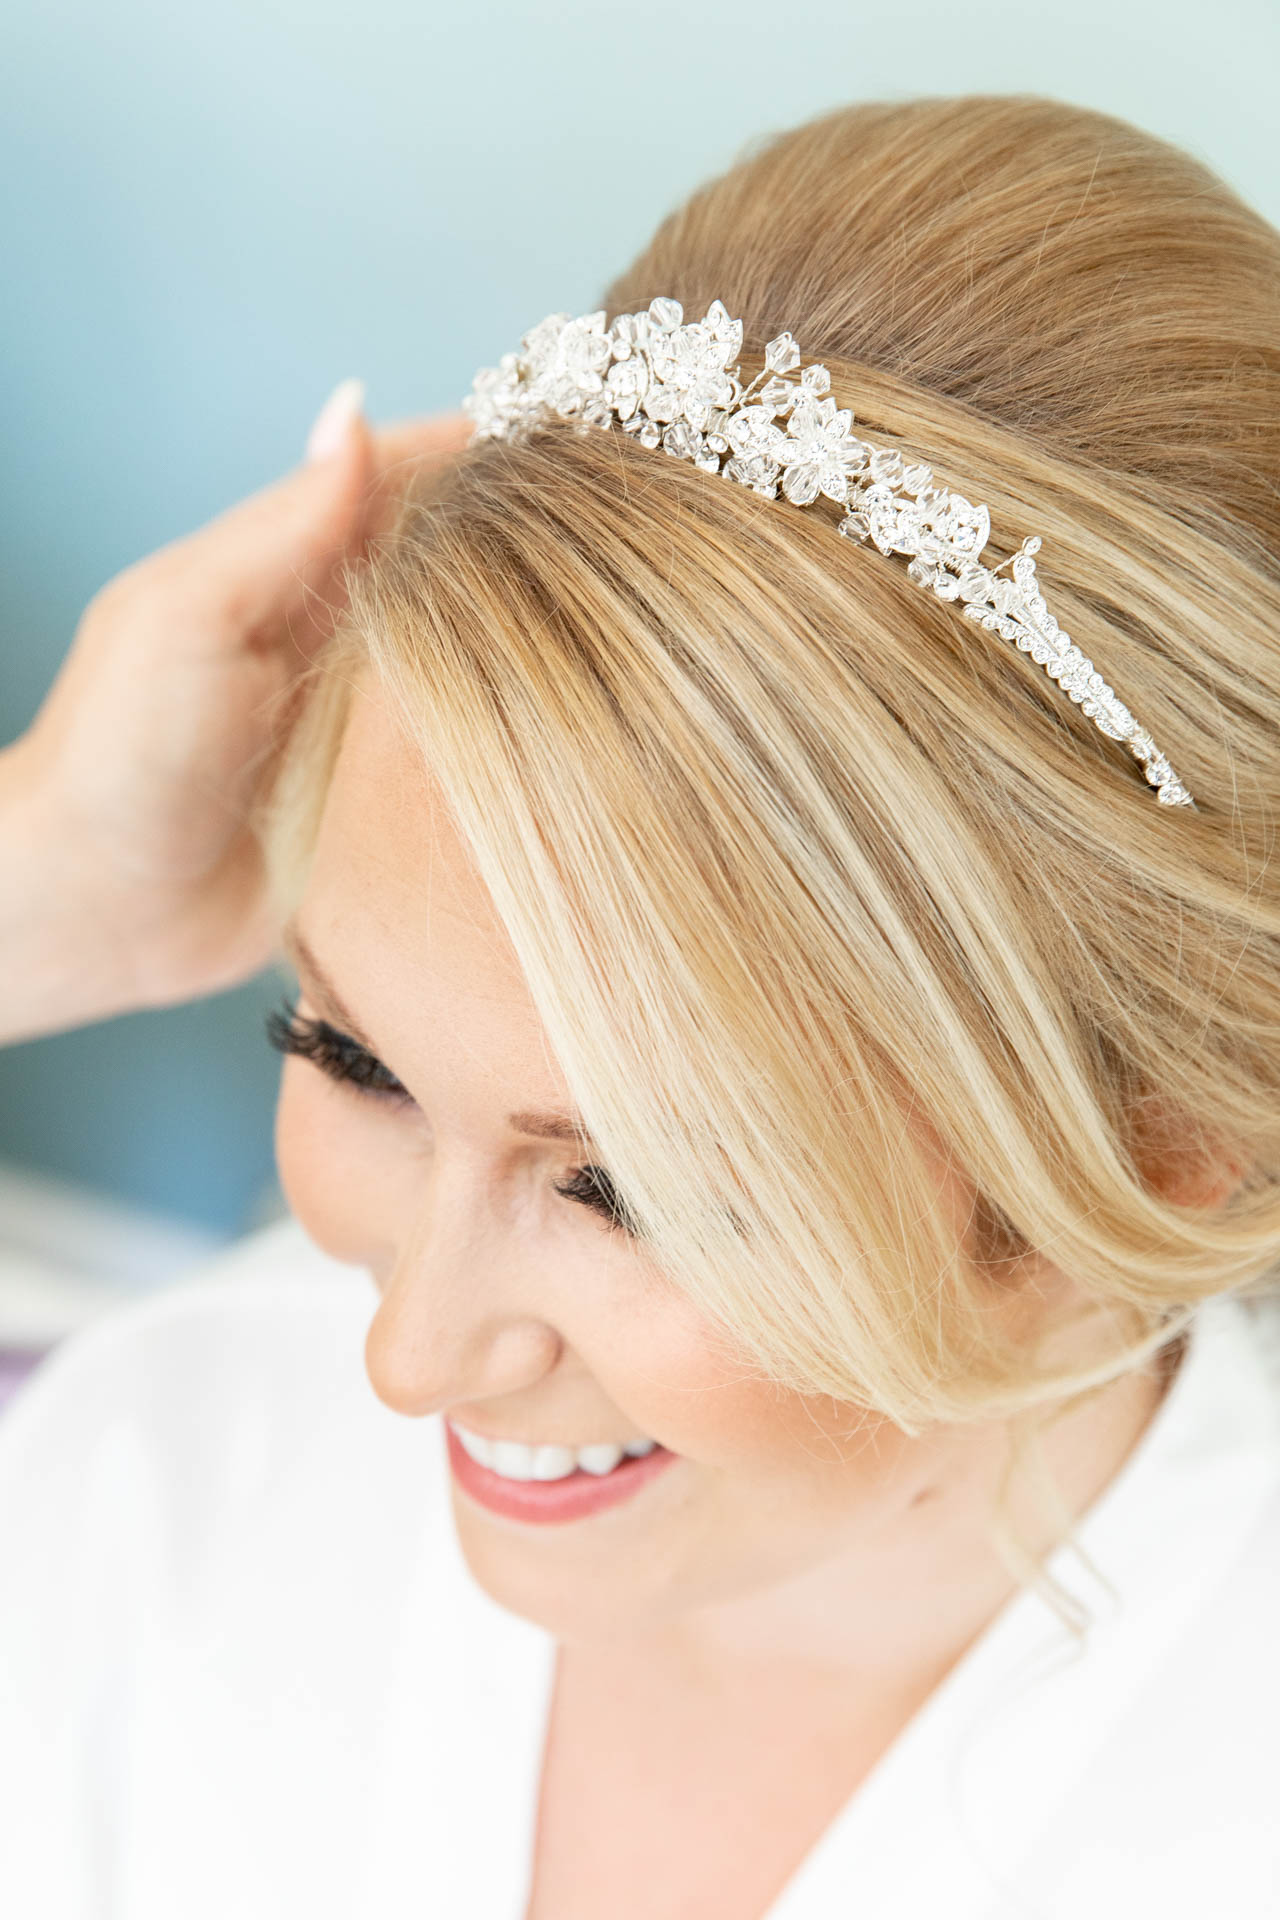 Wedding reportage photography of bridal preparations at Leigh-on-Sea Essex